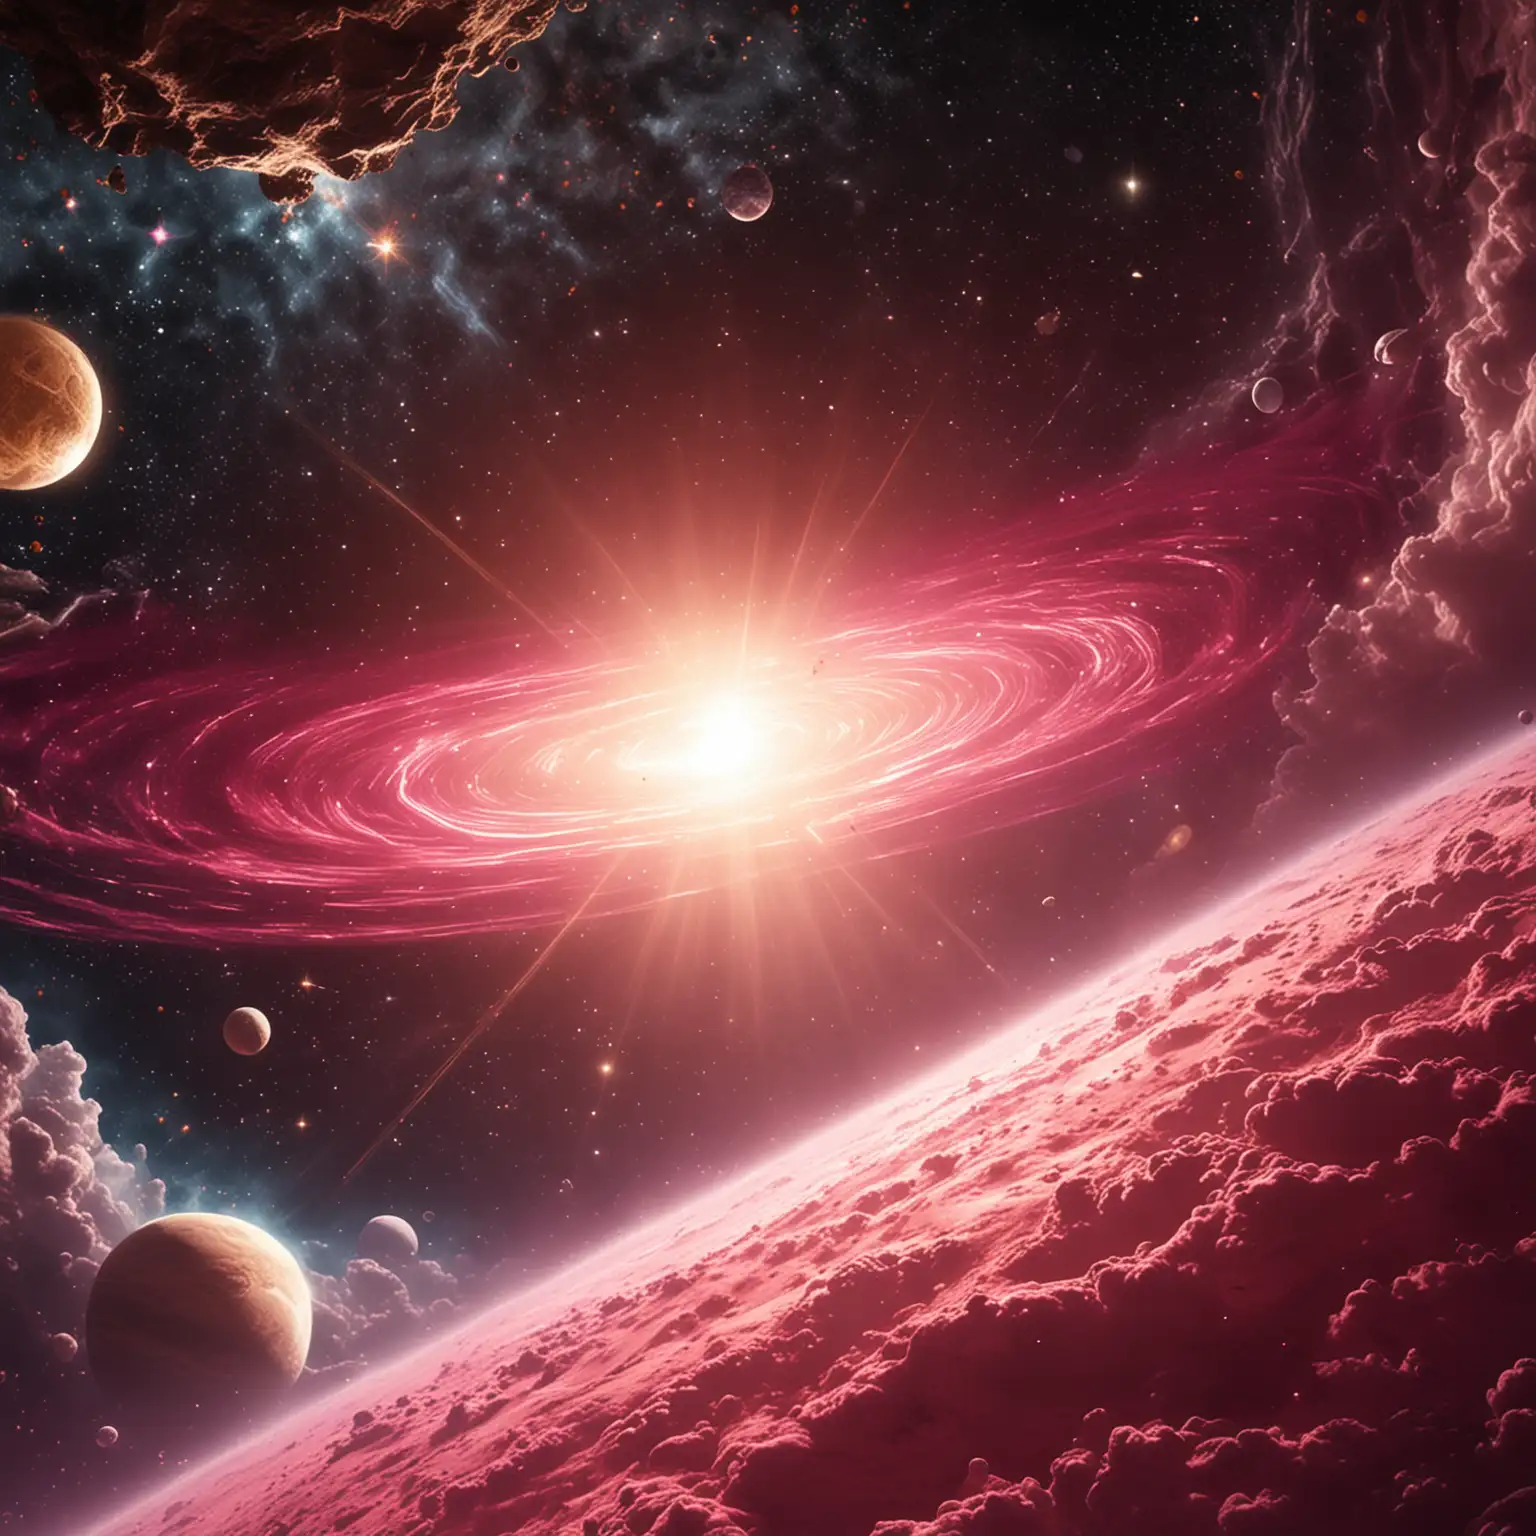 create an image that depicts outer space effects and gold and pink light effects